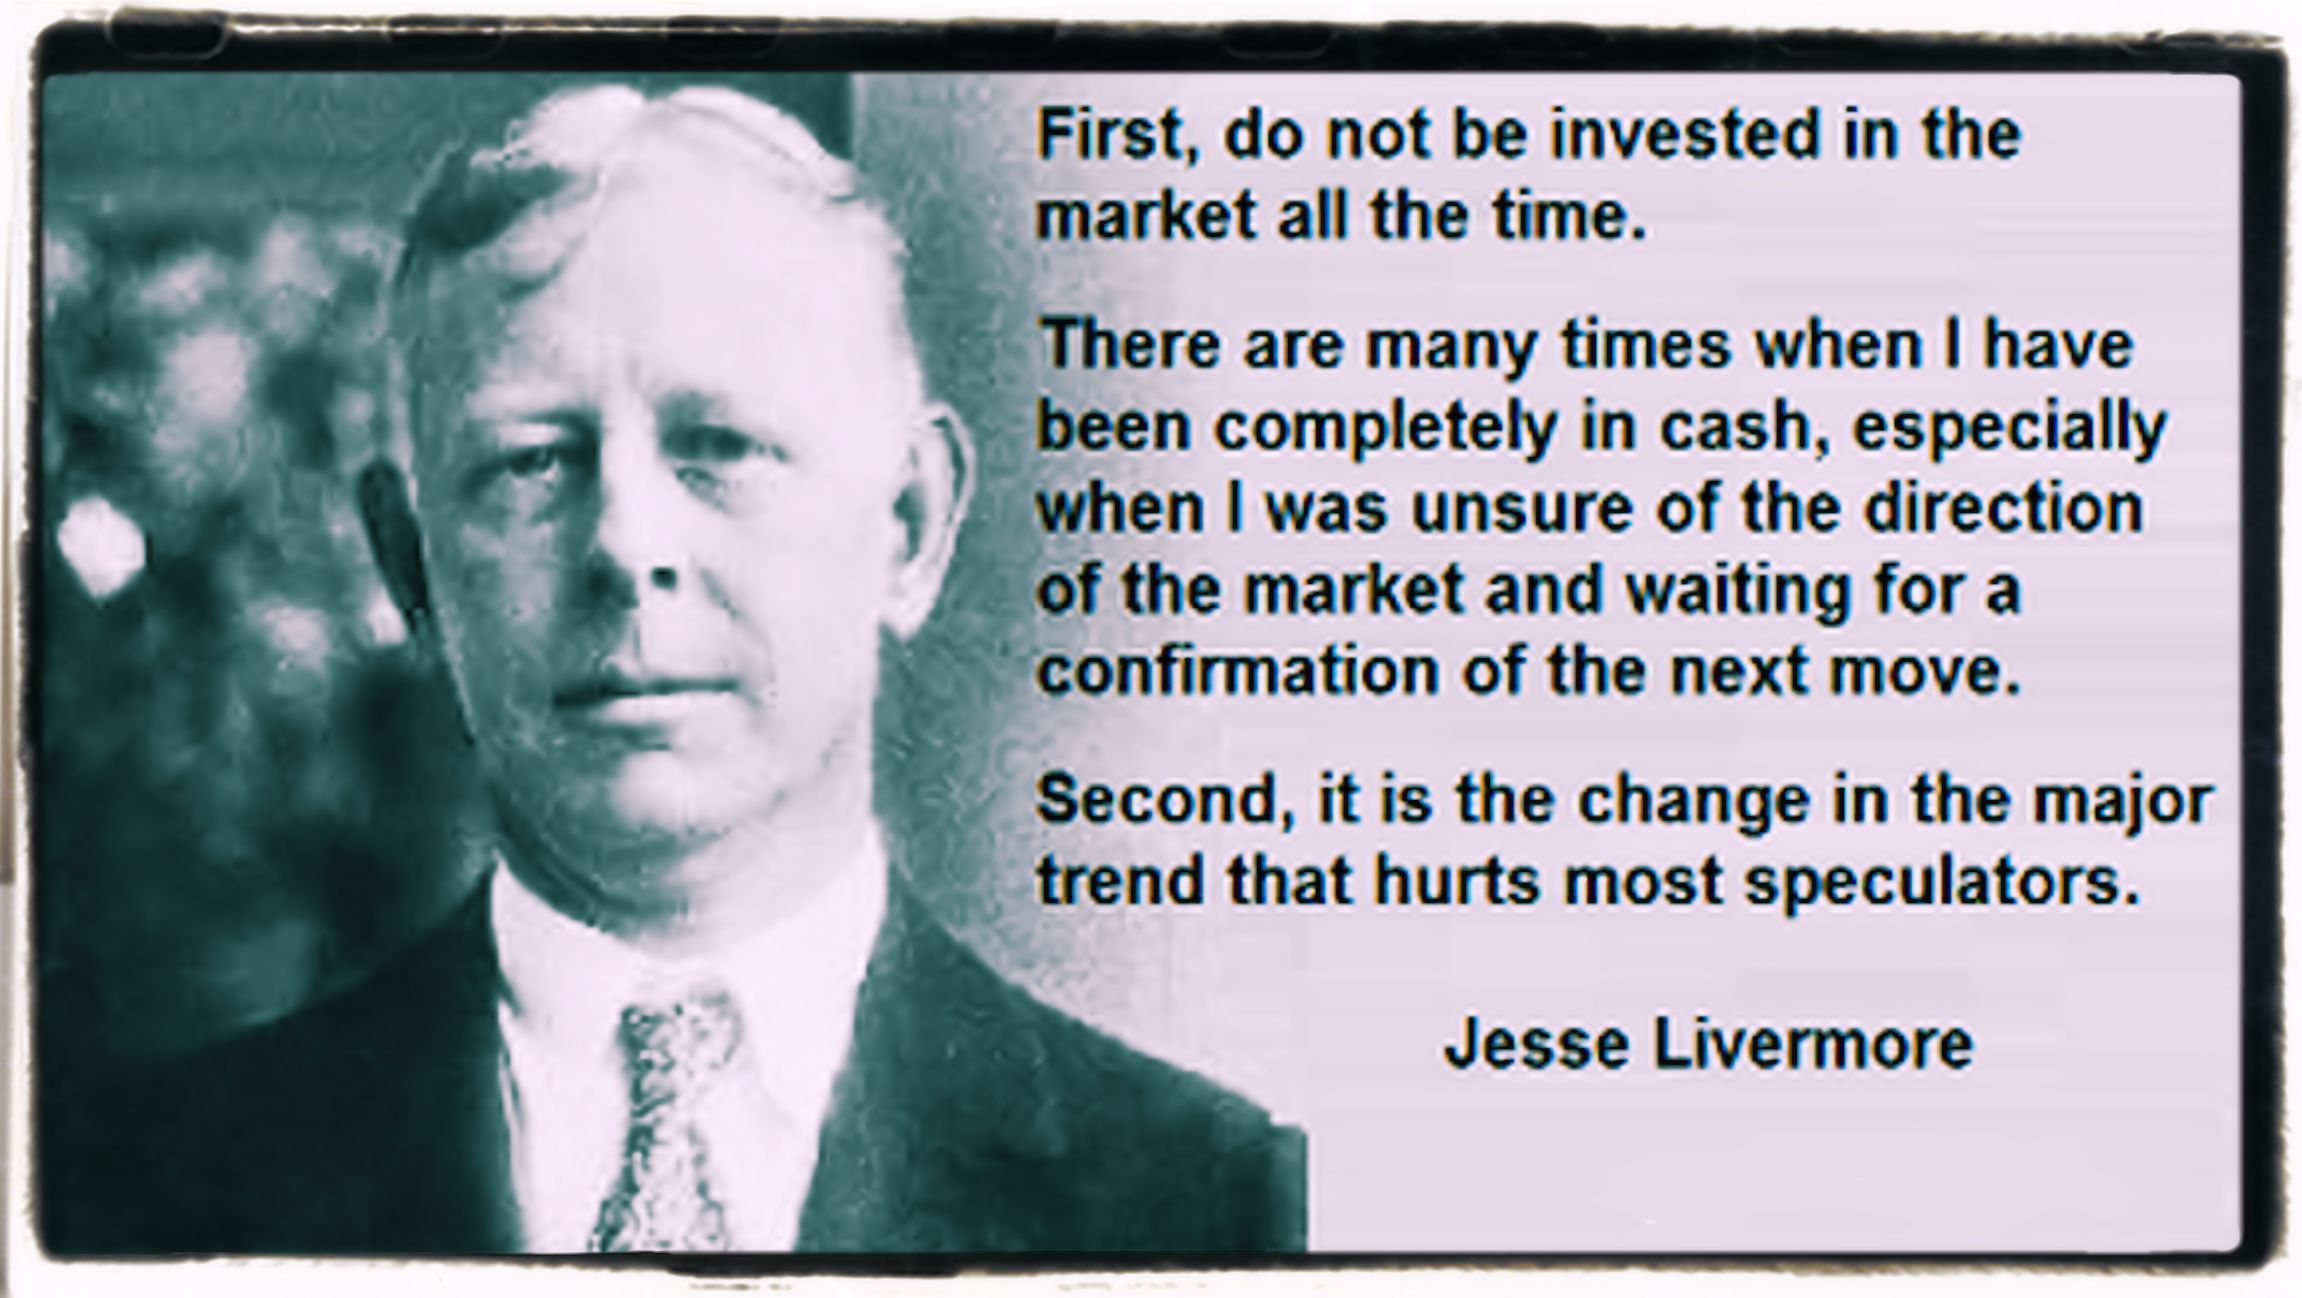 The true words of Jesse Livermore